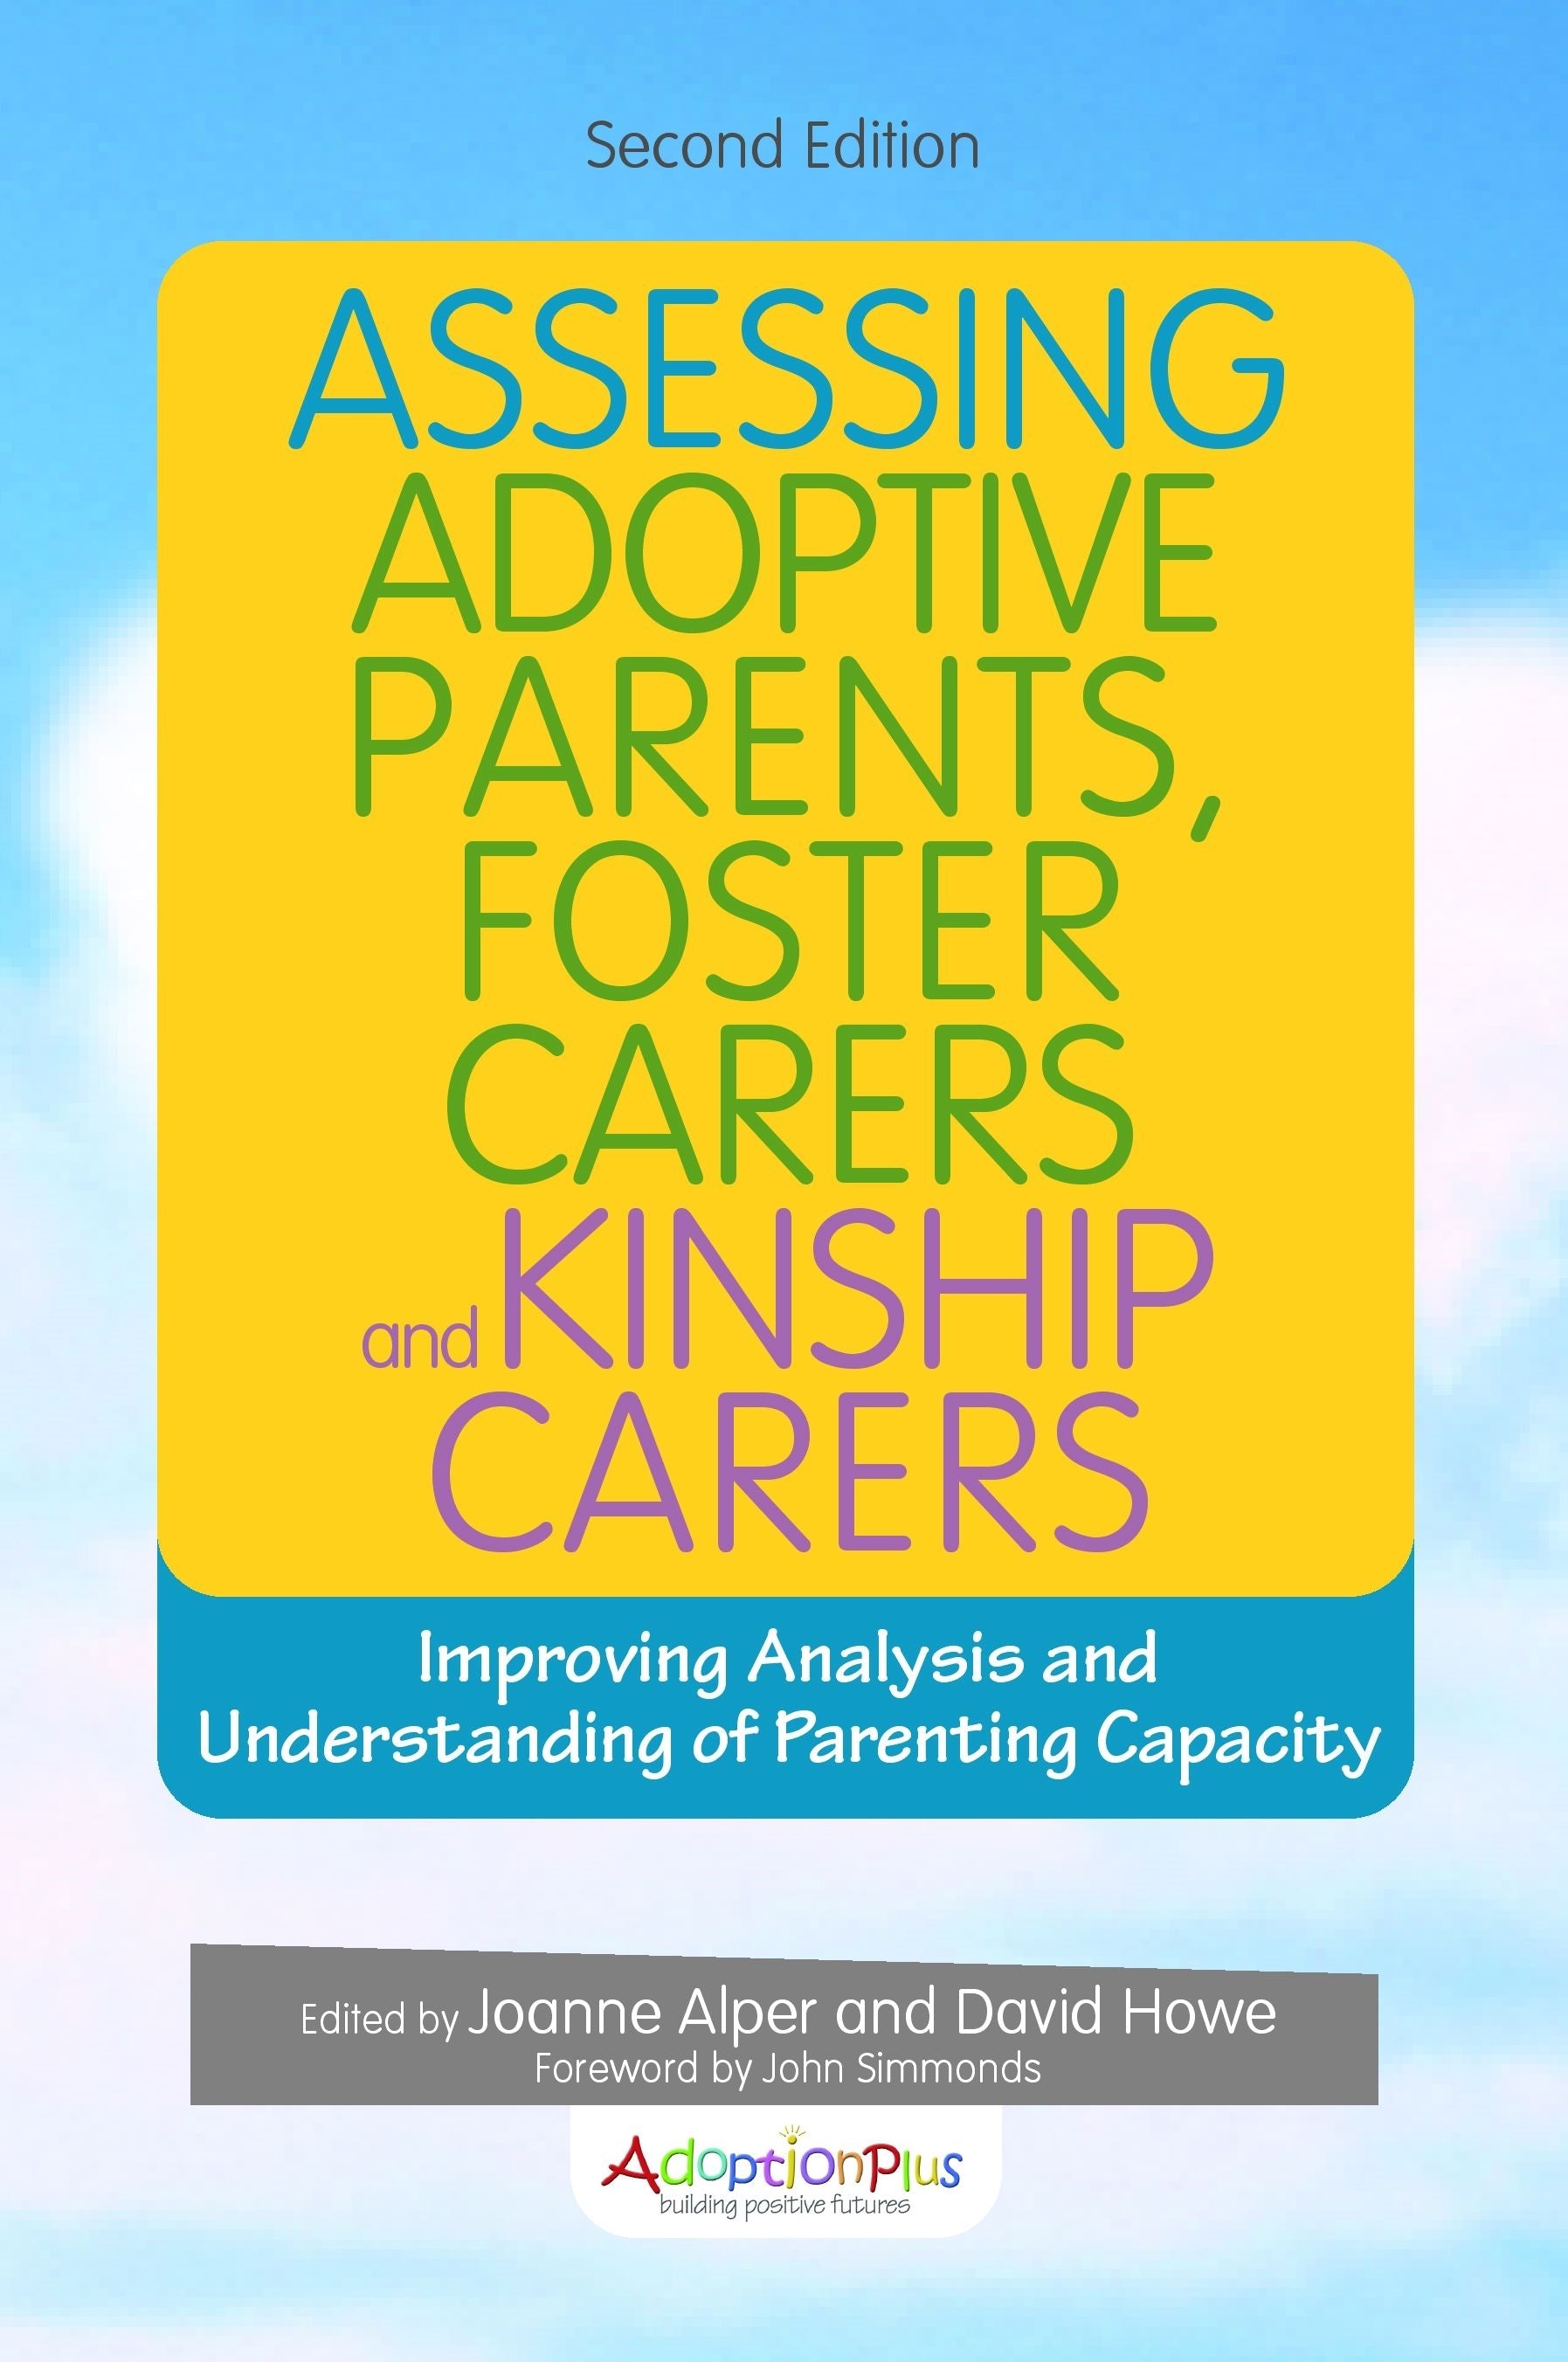 Assessing Adoptive Parents, Foster Carers and Kinship Carers, Second Edition by Joanne Alper, David Howe, No Author Listed